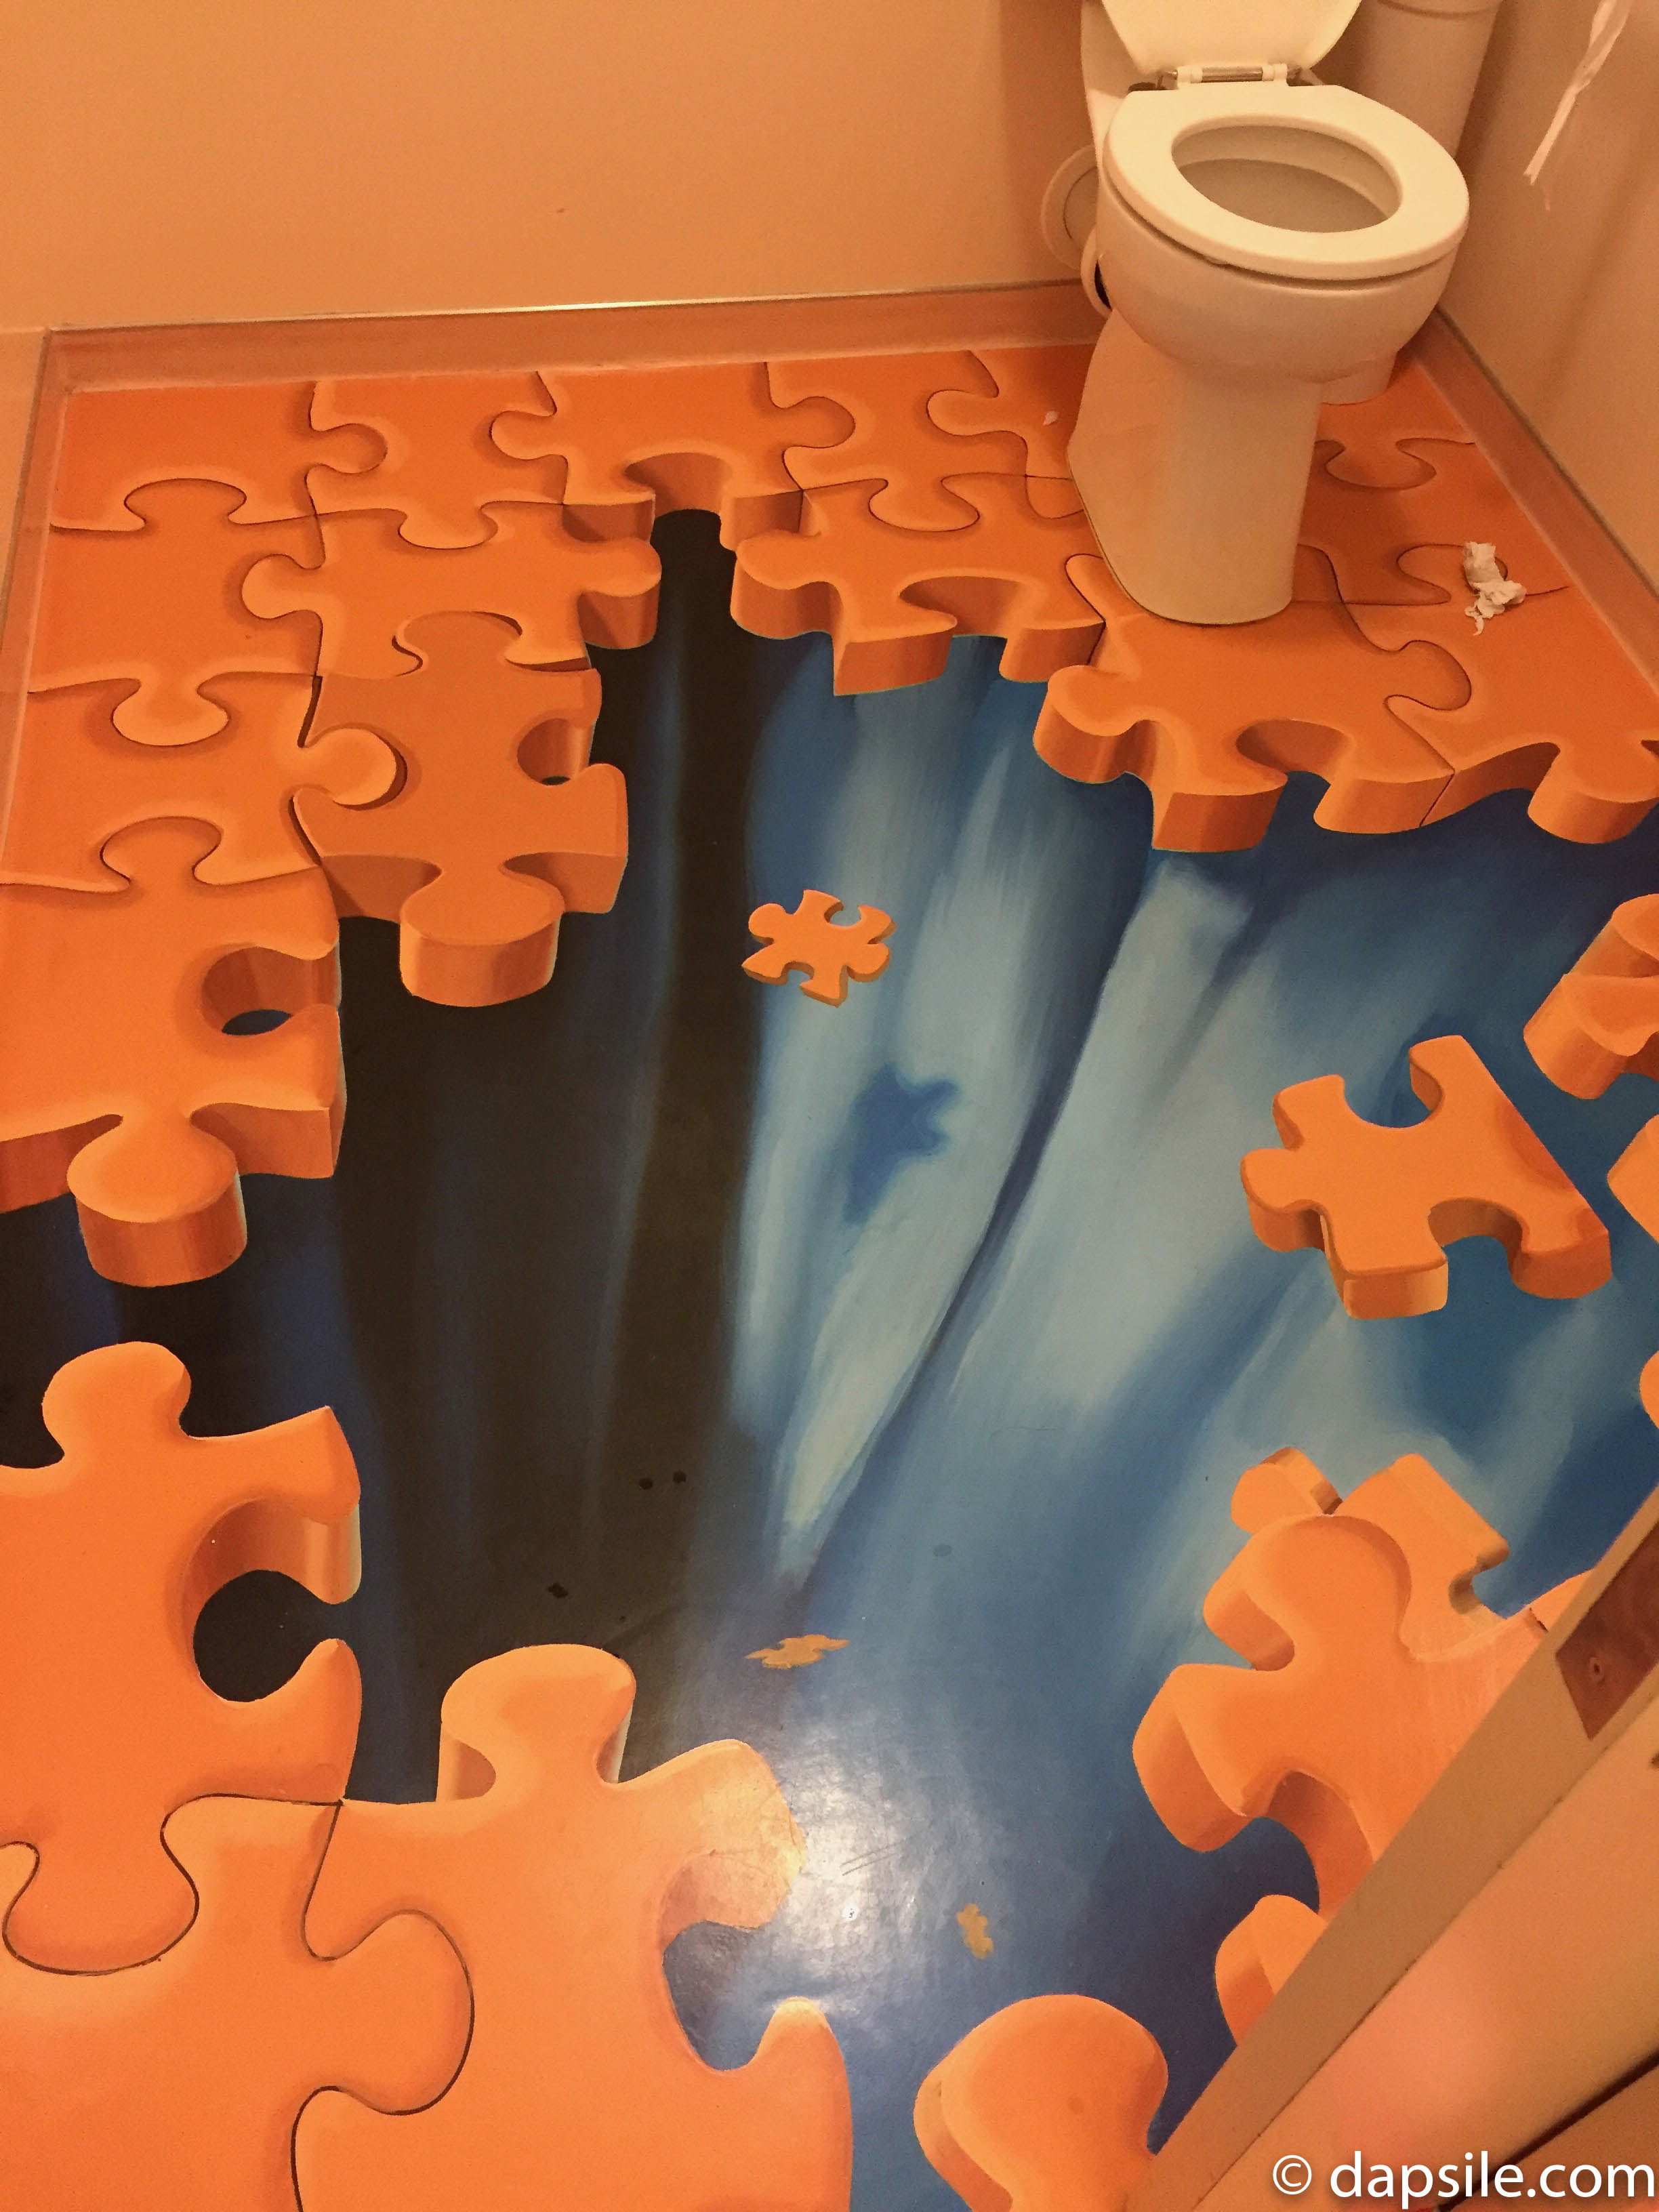 Puzzling World Puzzle Bathroom where the floor is puzzle pieces falling down into a hole